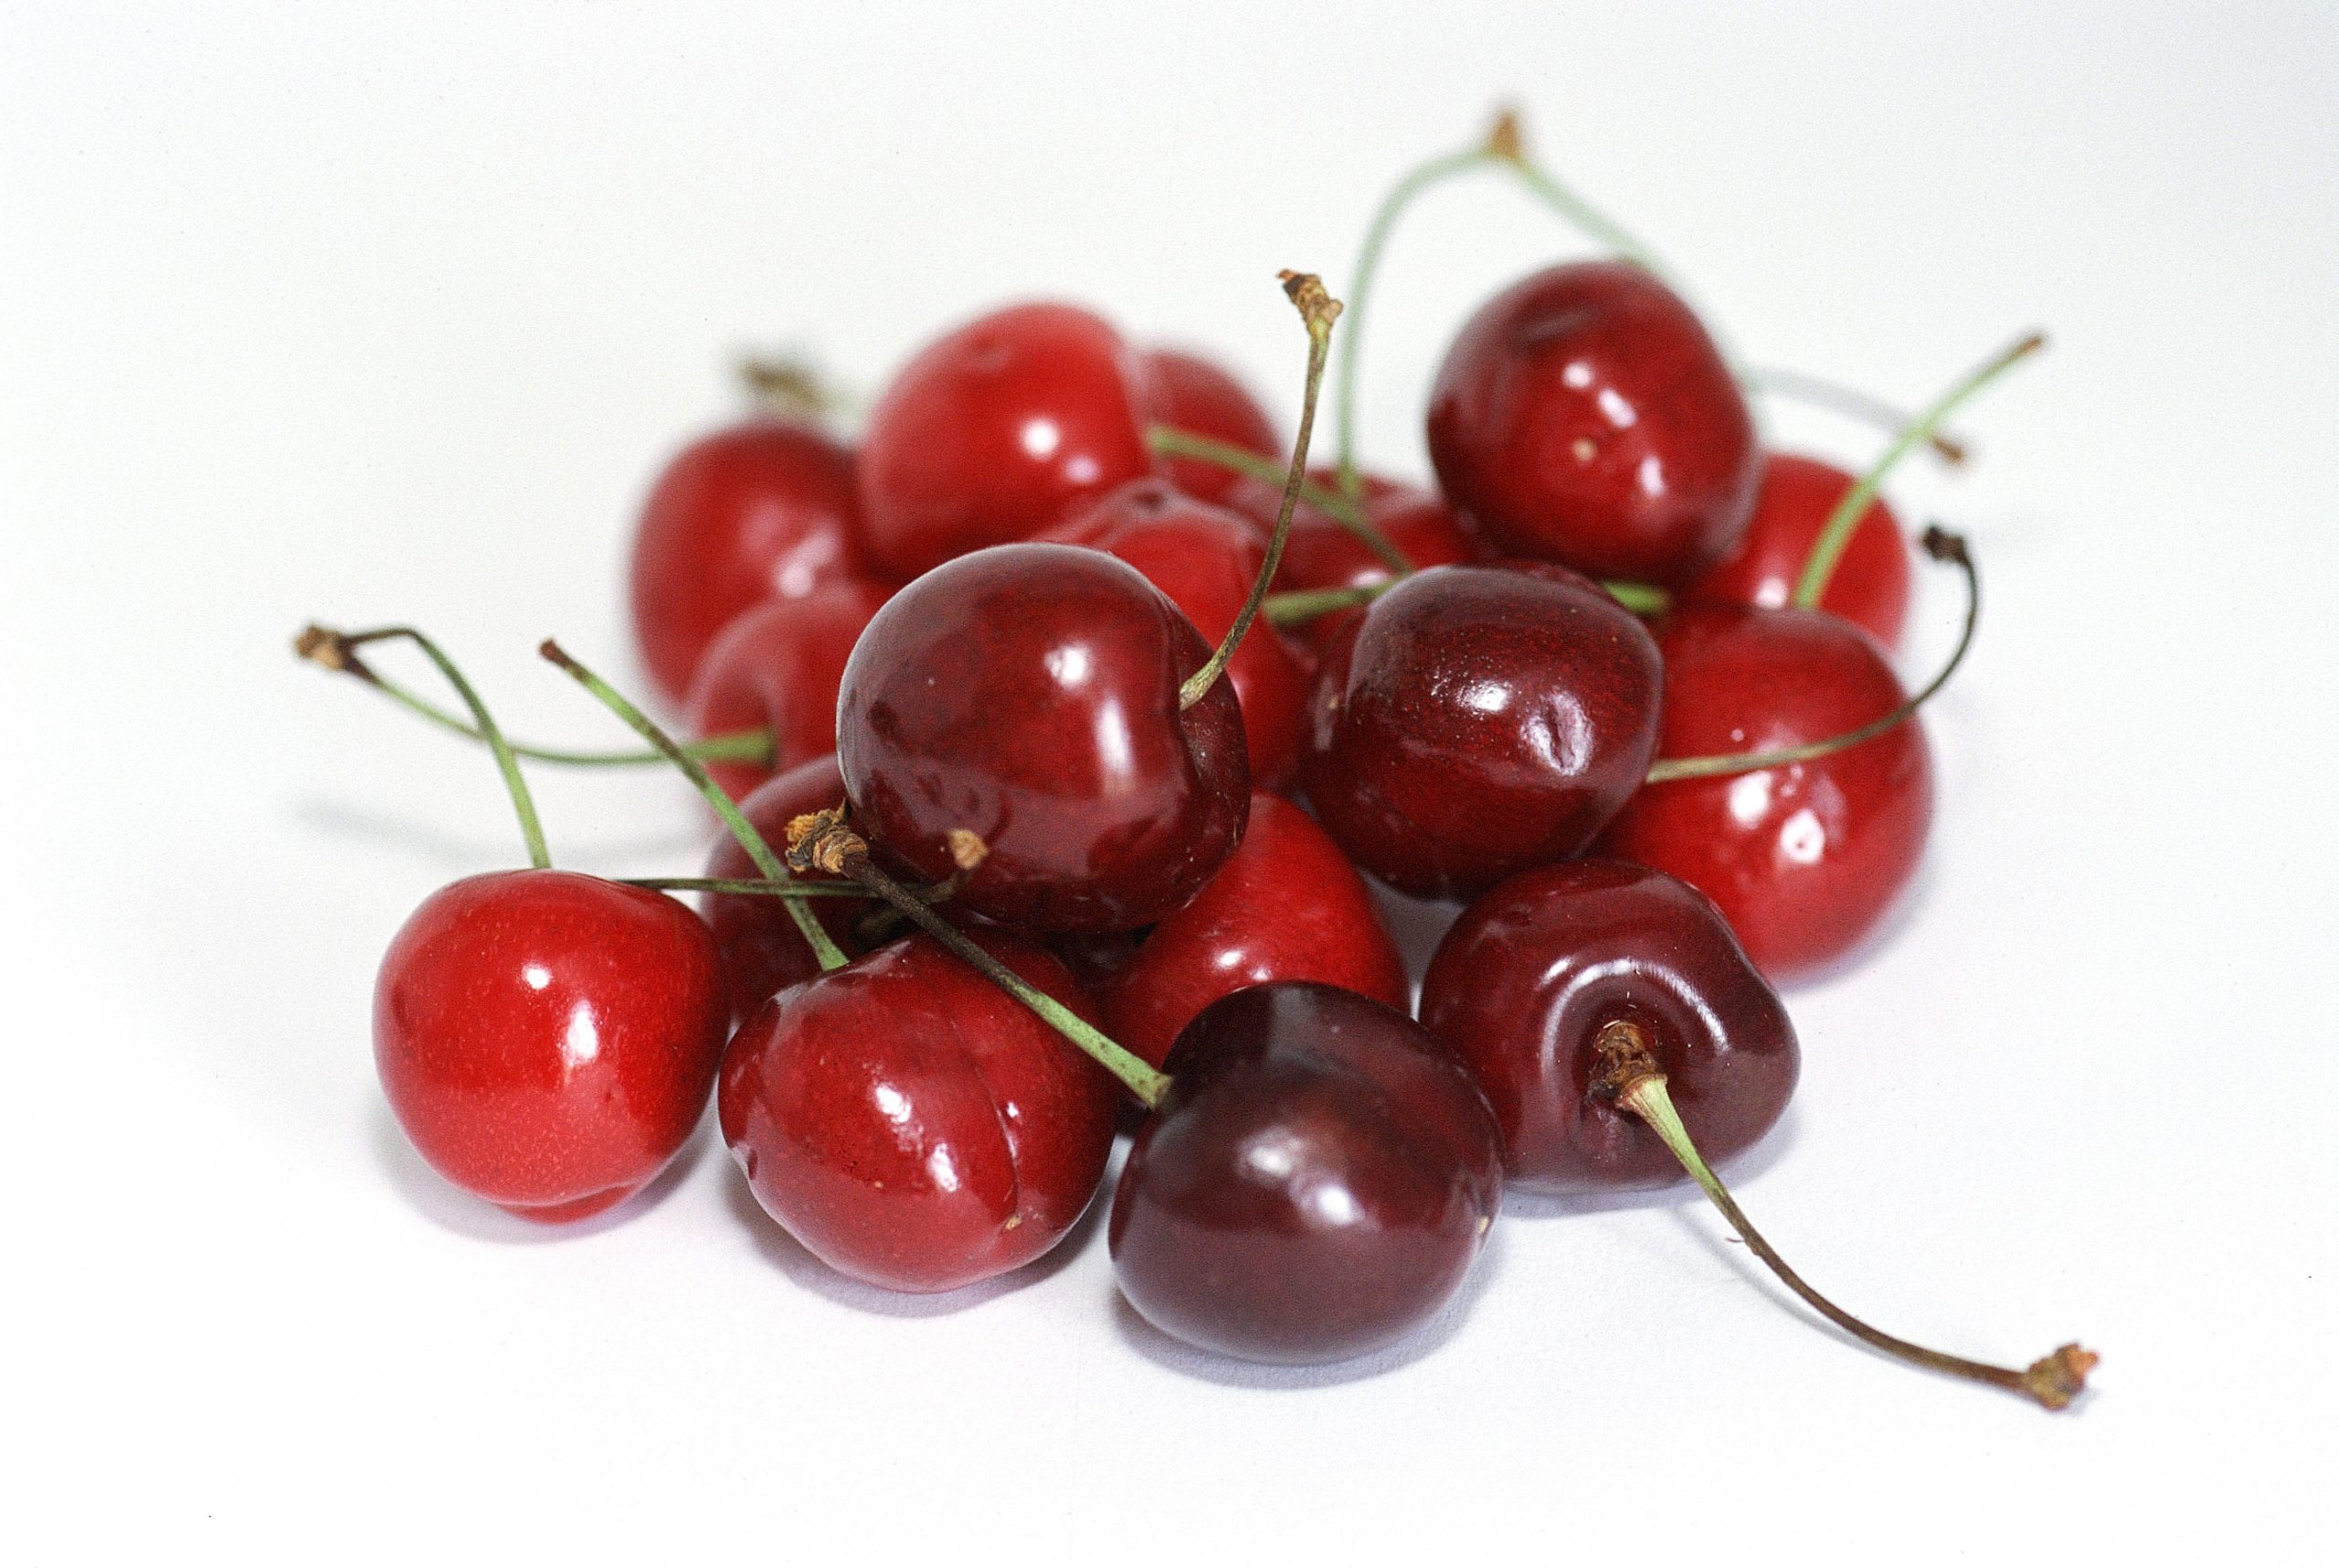 A consignment of 1.2 tons of fresh cherries from Australia formed the first import into China under the China-Australia free trade agreement (FTA), signed last June and coming into effect on December 20, 2015.